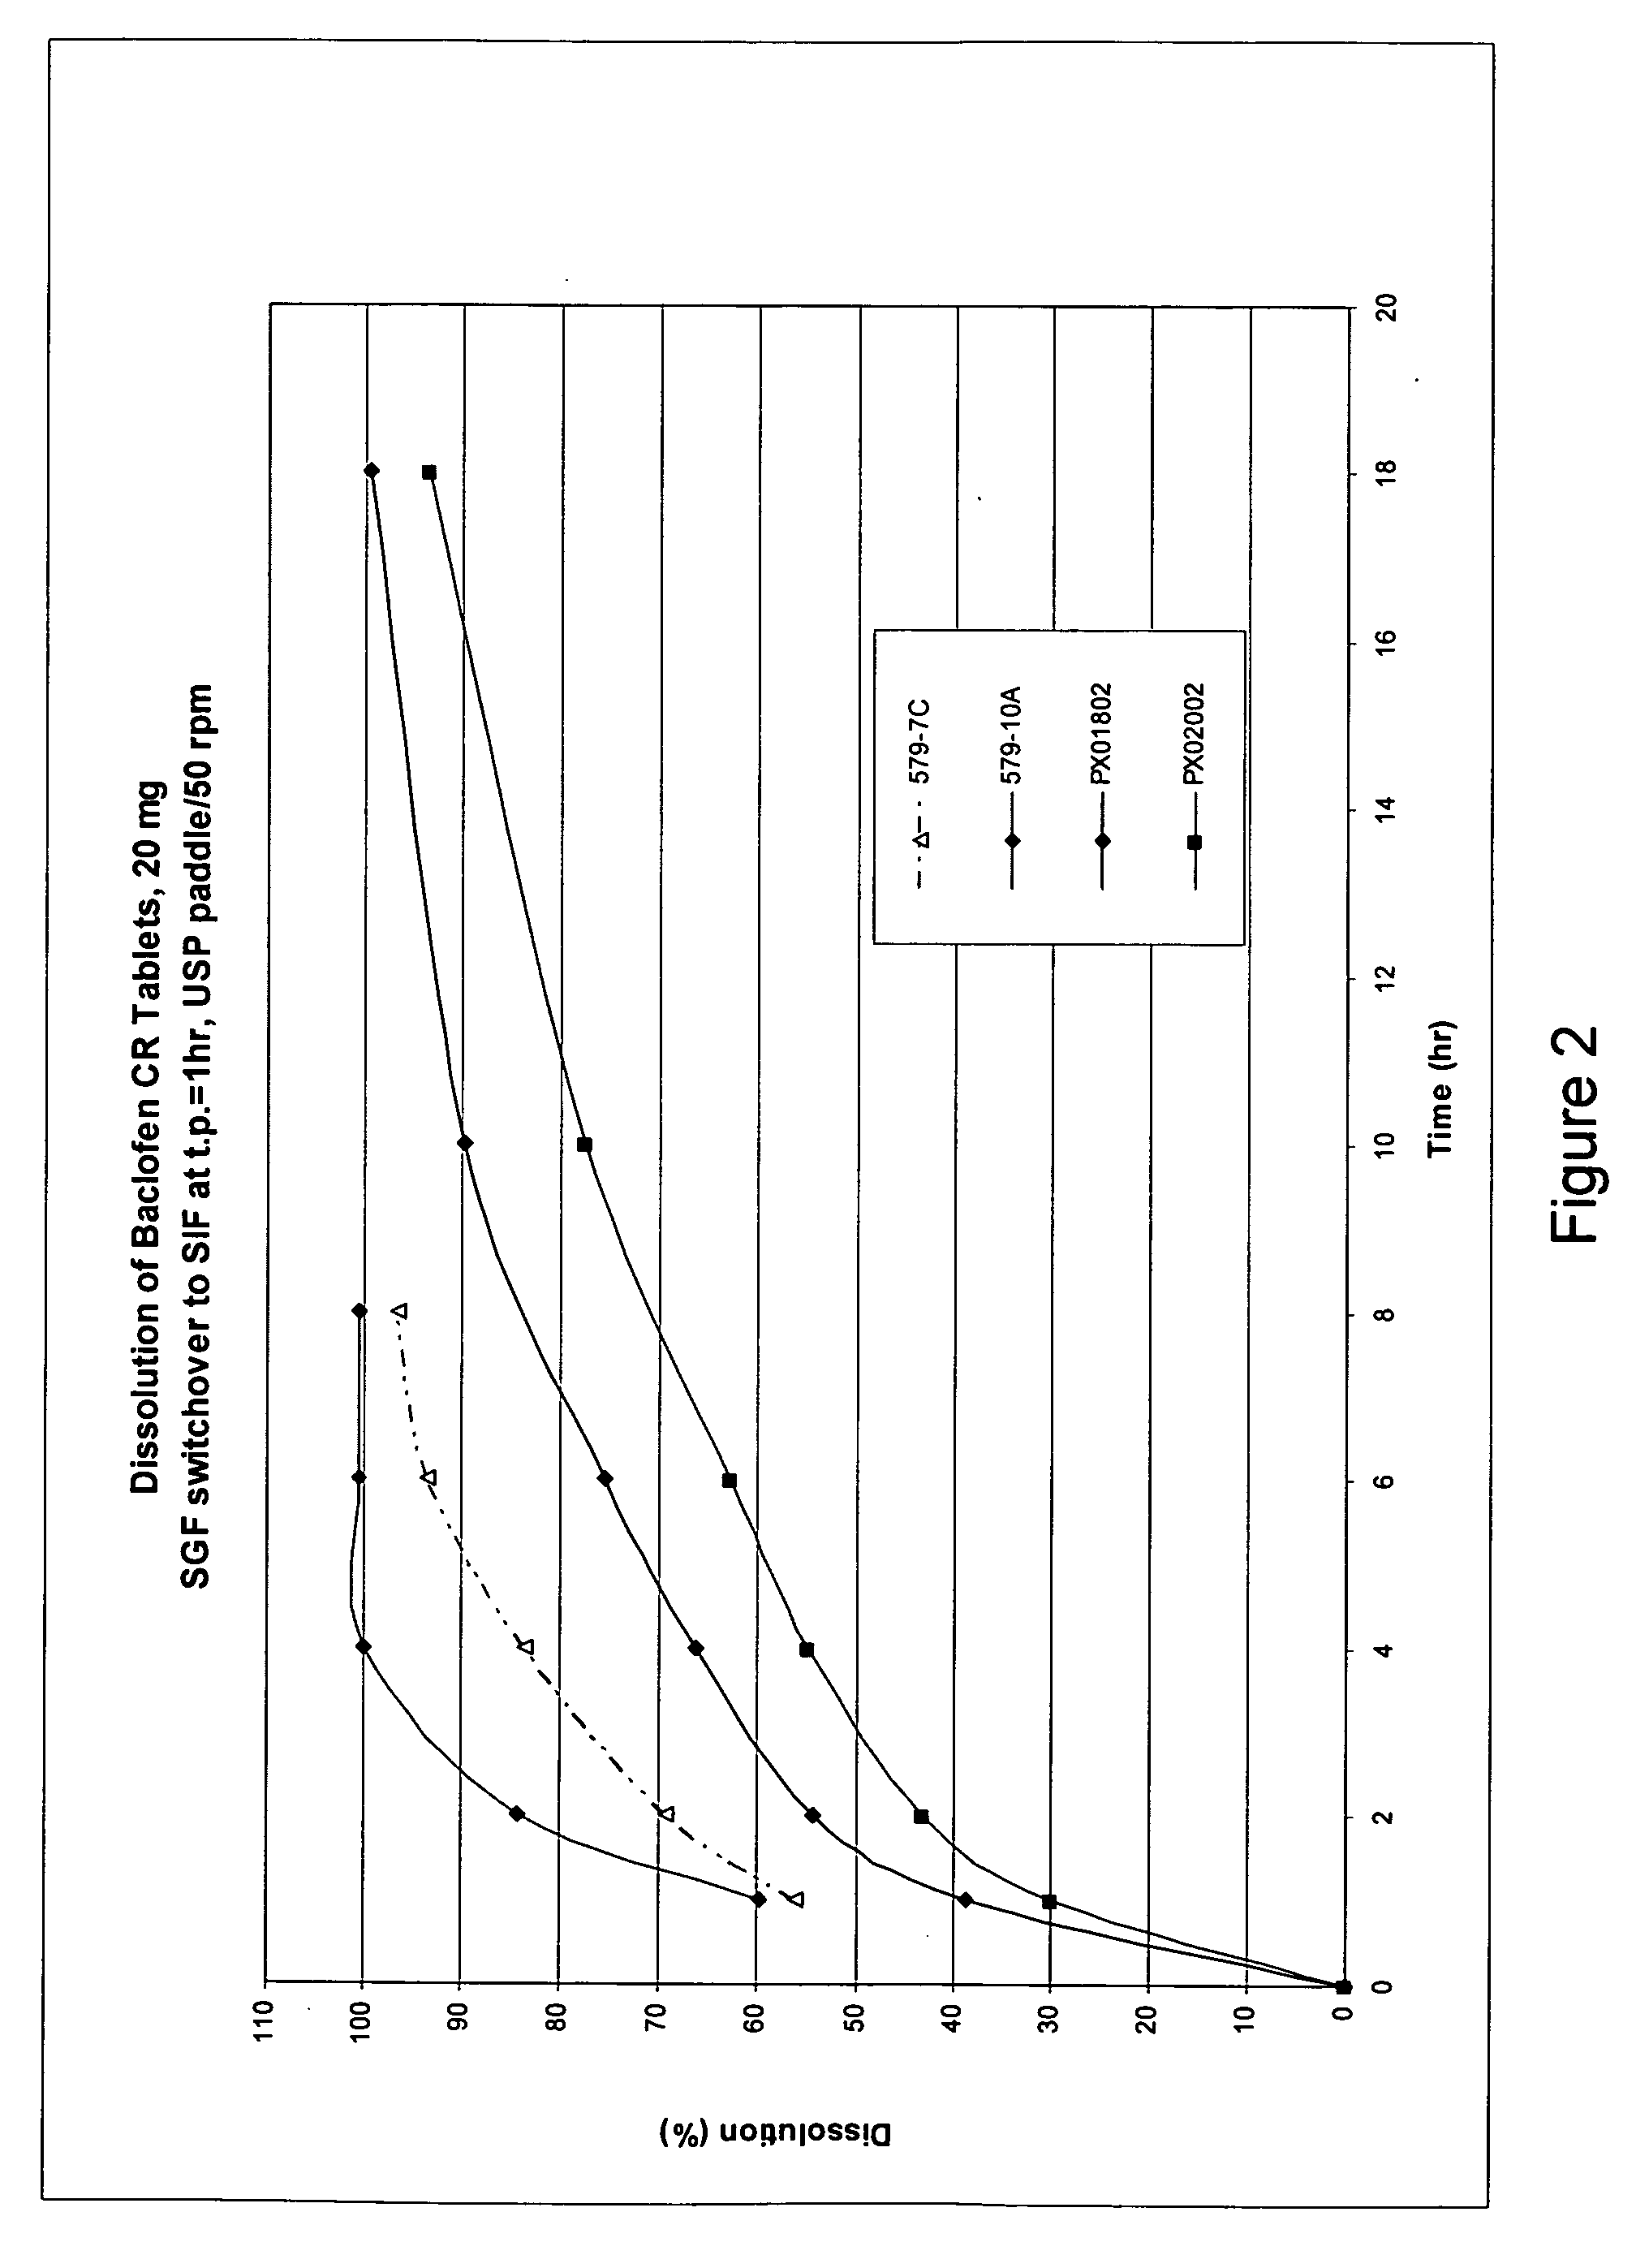 Pharmaceutical dosage forms having controlled release properties that contain a GABAB receptor agonist